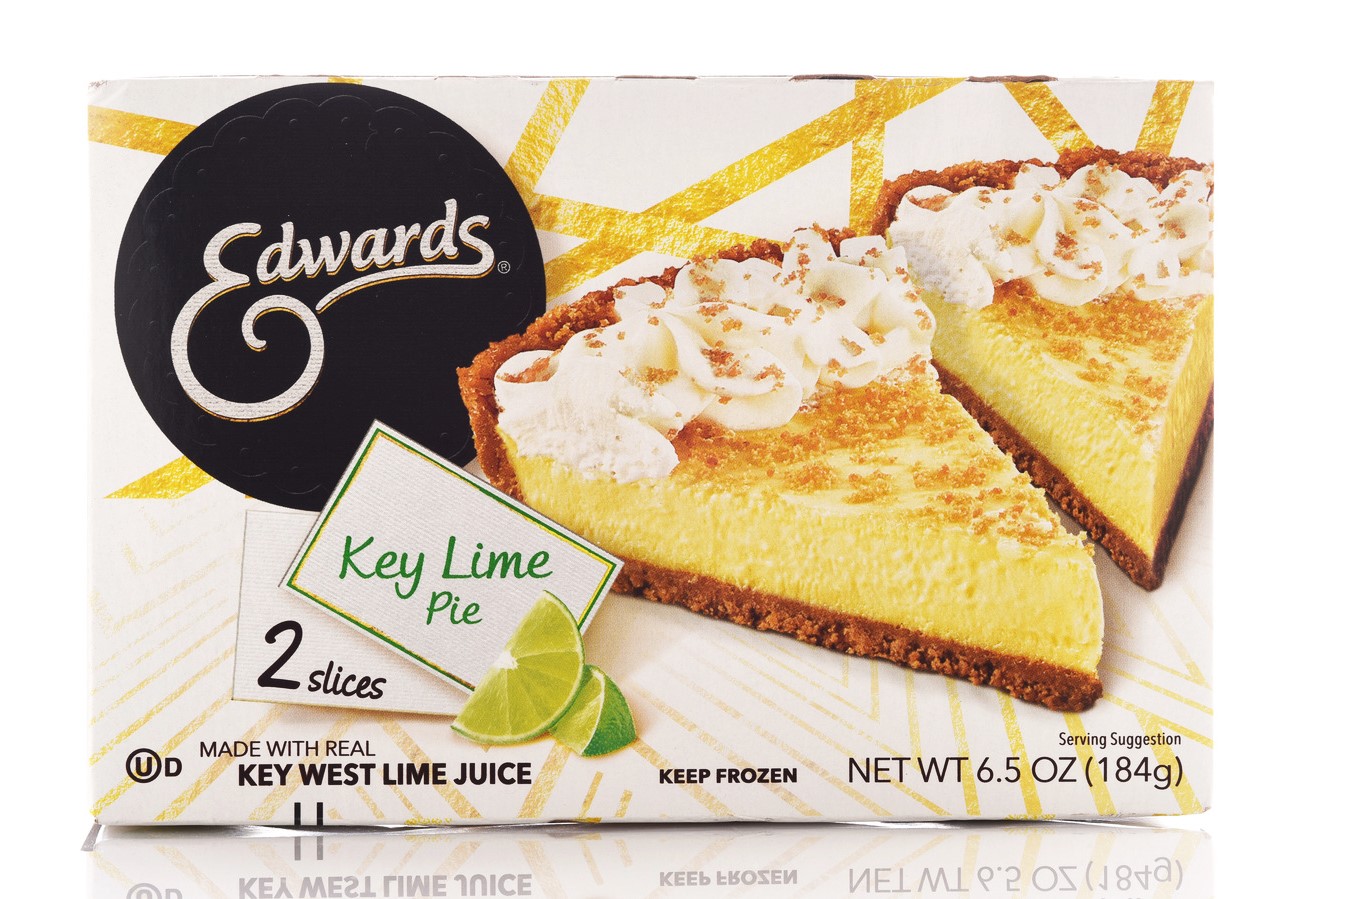 19-edwards-key-lime-pie-nutrition-facts